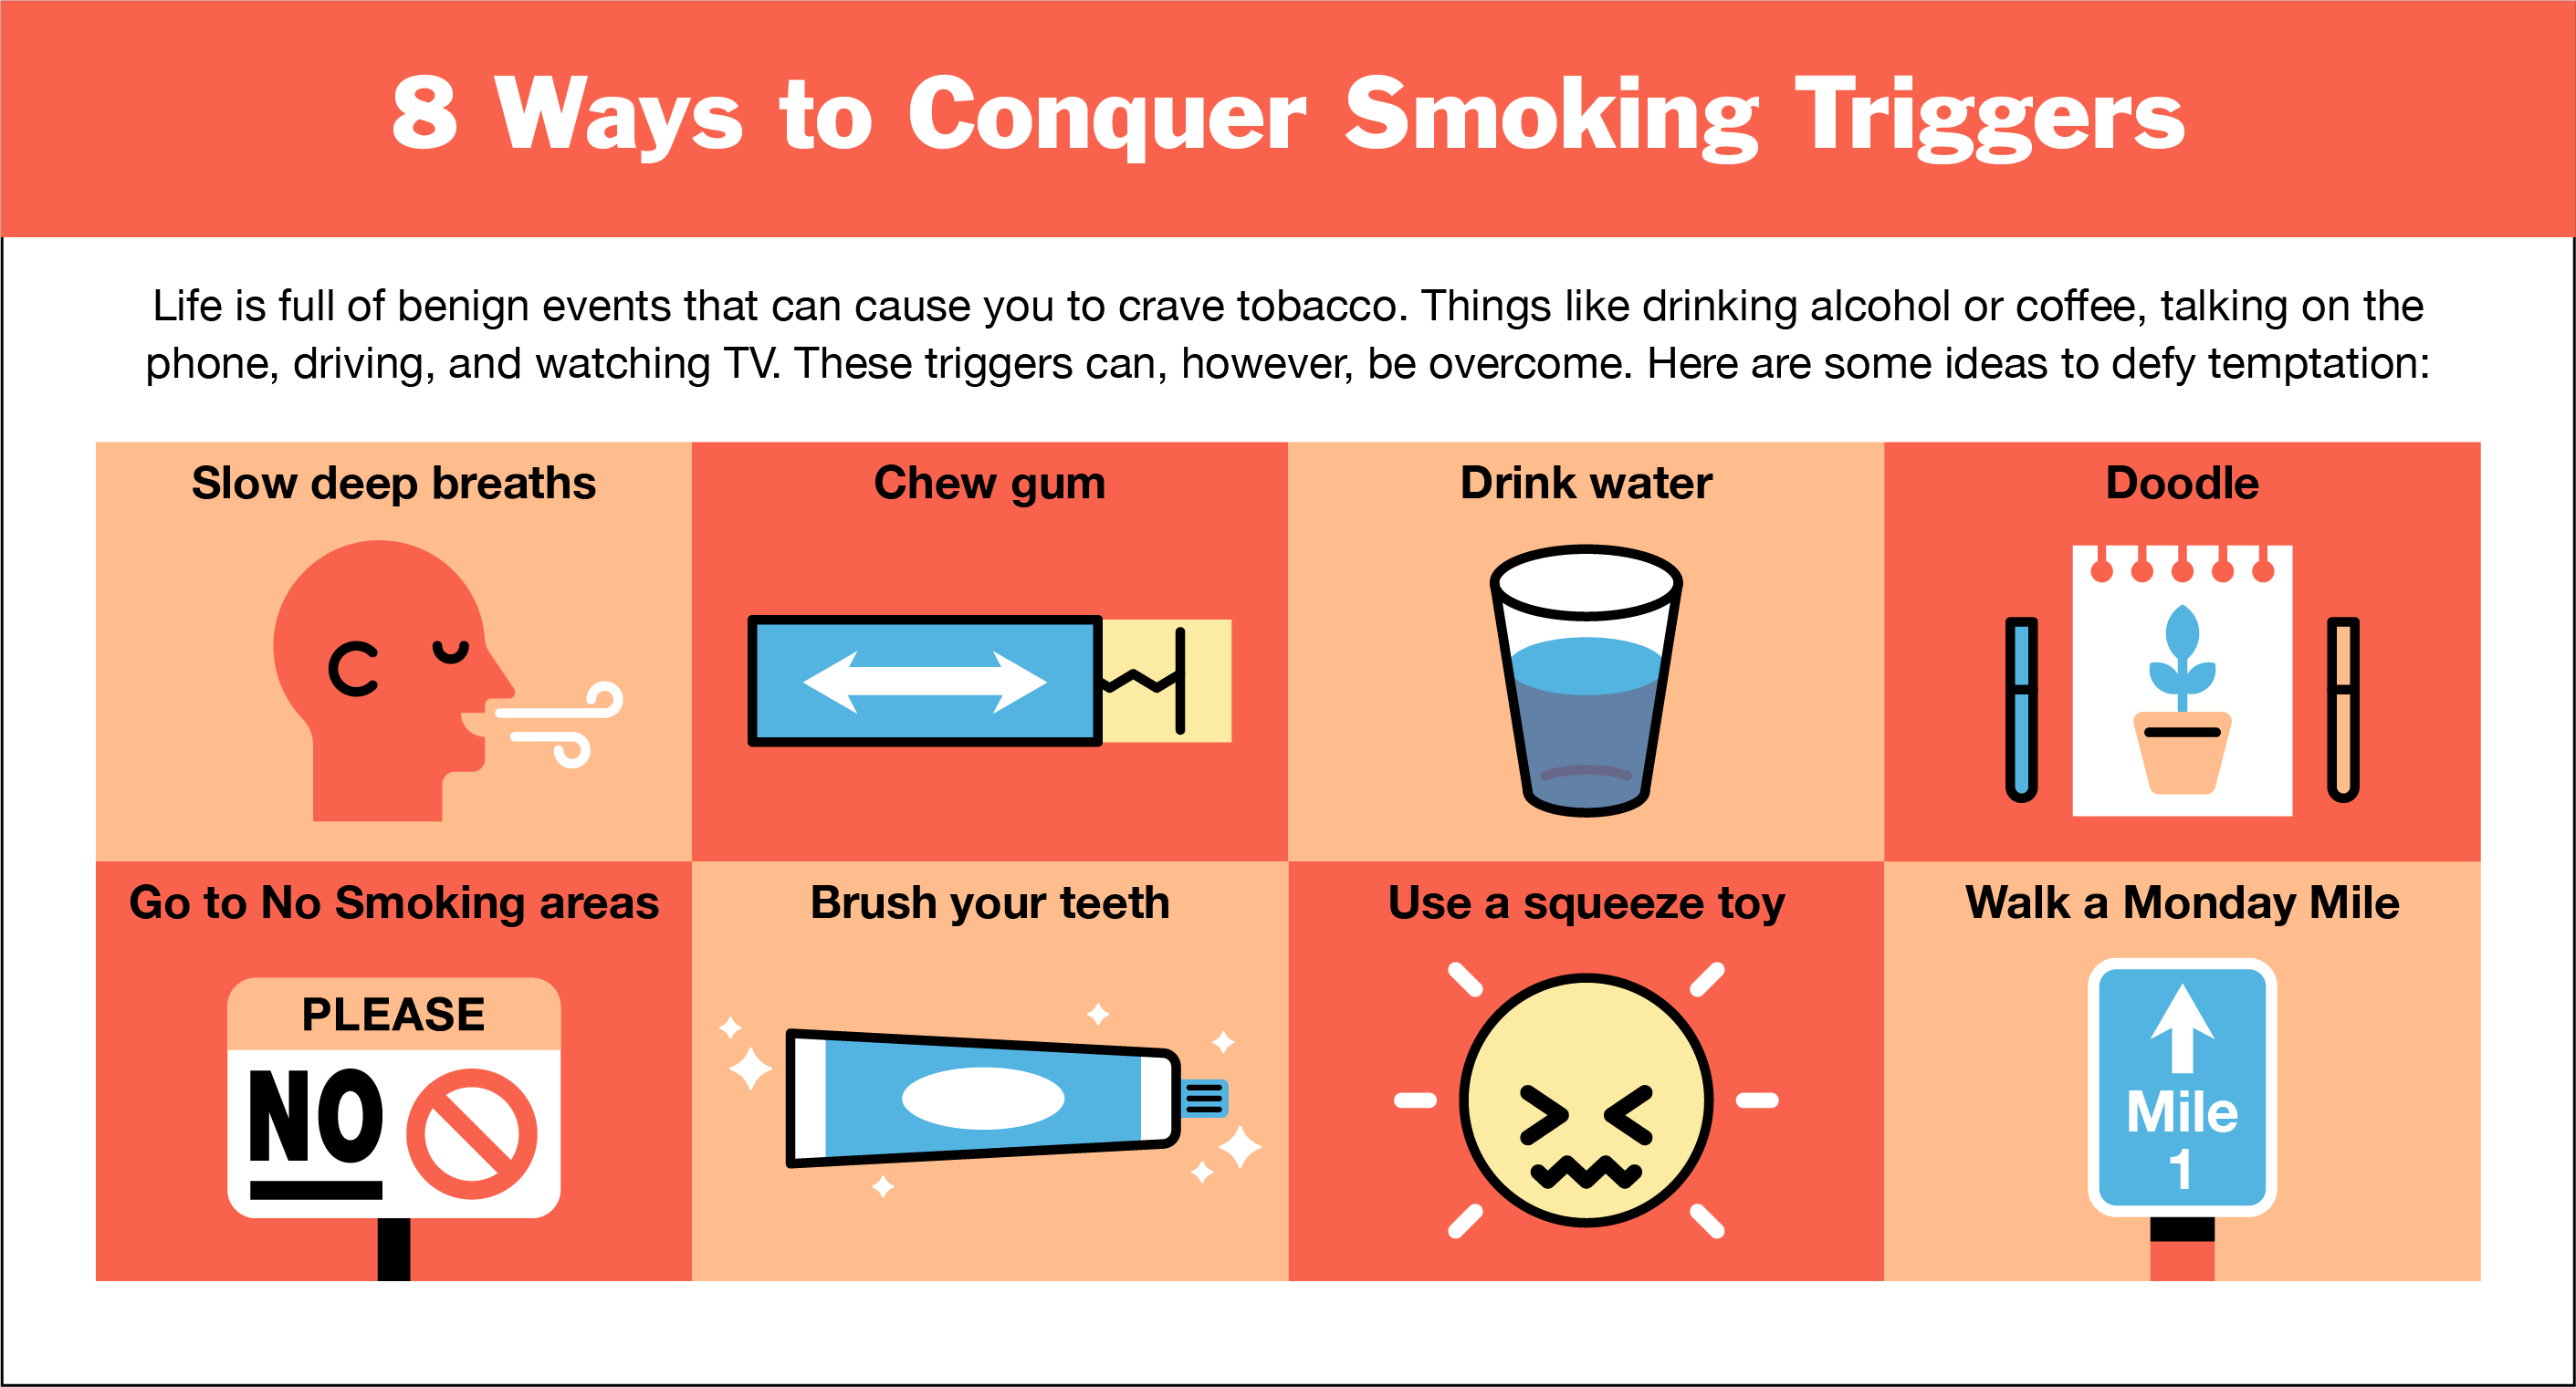 8 Ways To Conquer Mindless Smoking Triggers This Monday